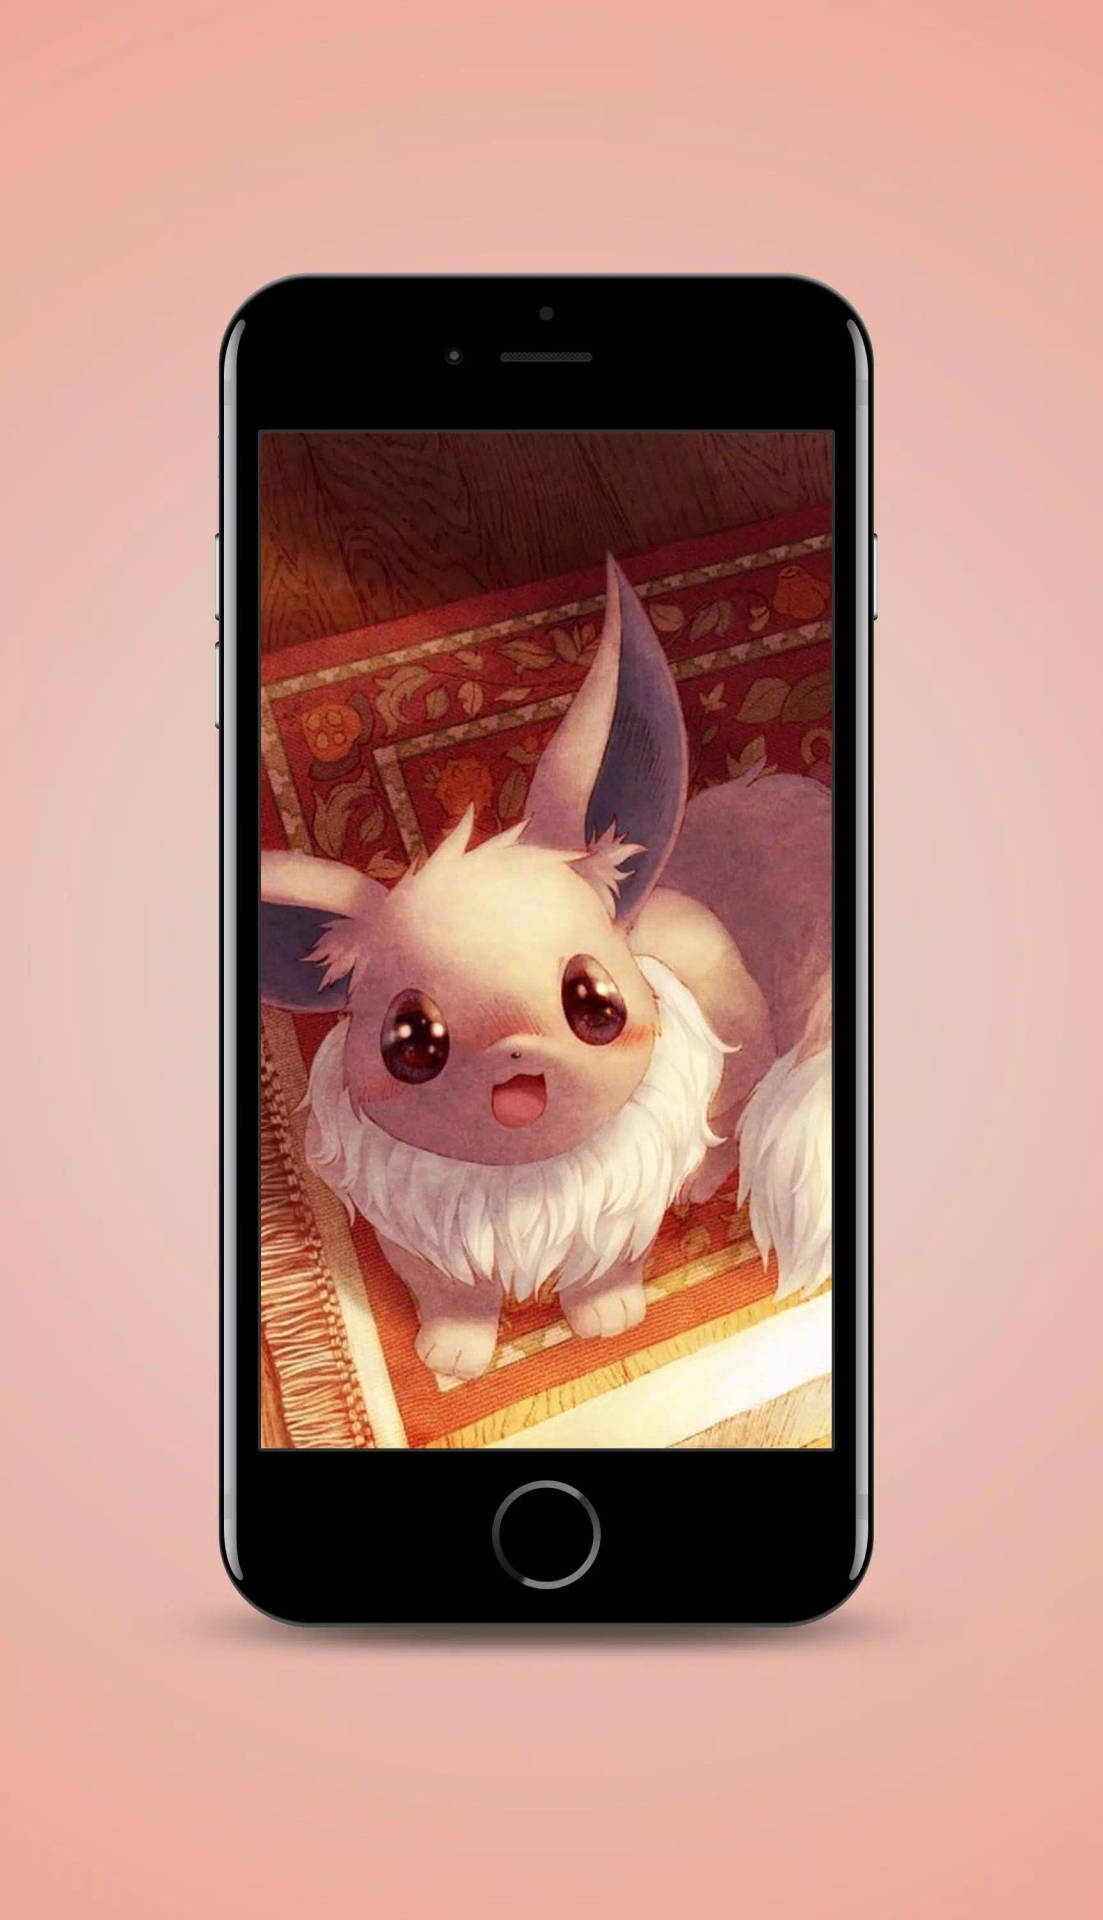 Put your day in the paws of Eevee with this ultra cute Eevee iPhone wallpaper! Wallpaper